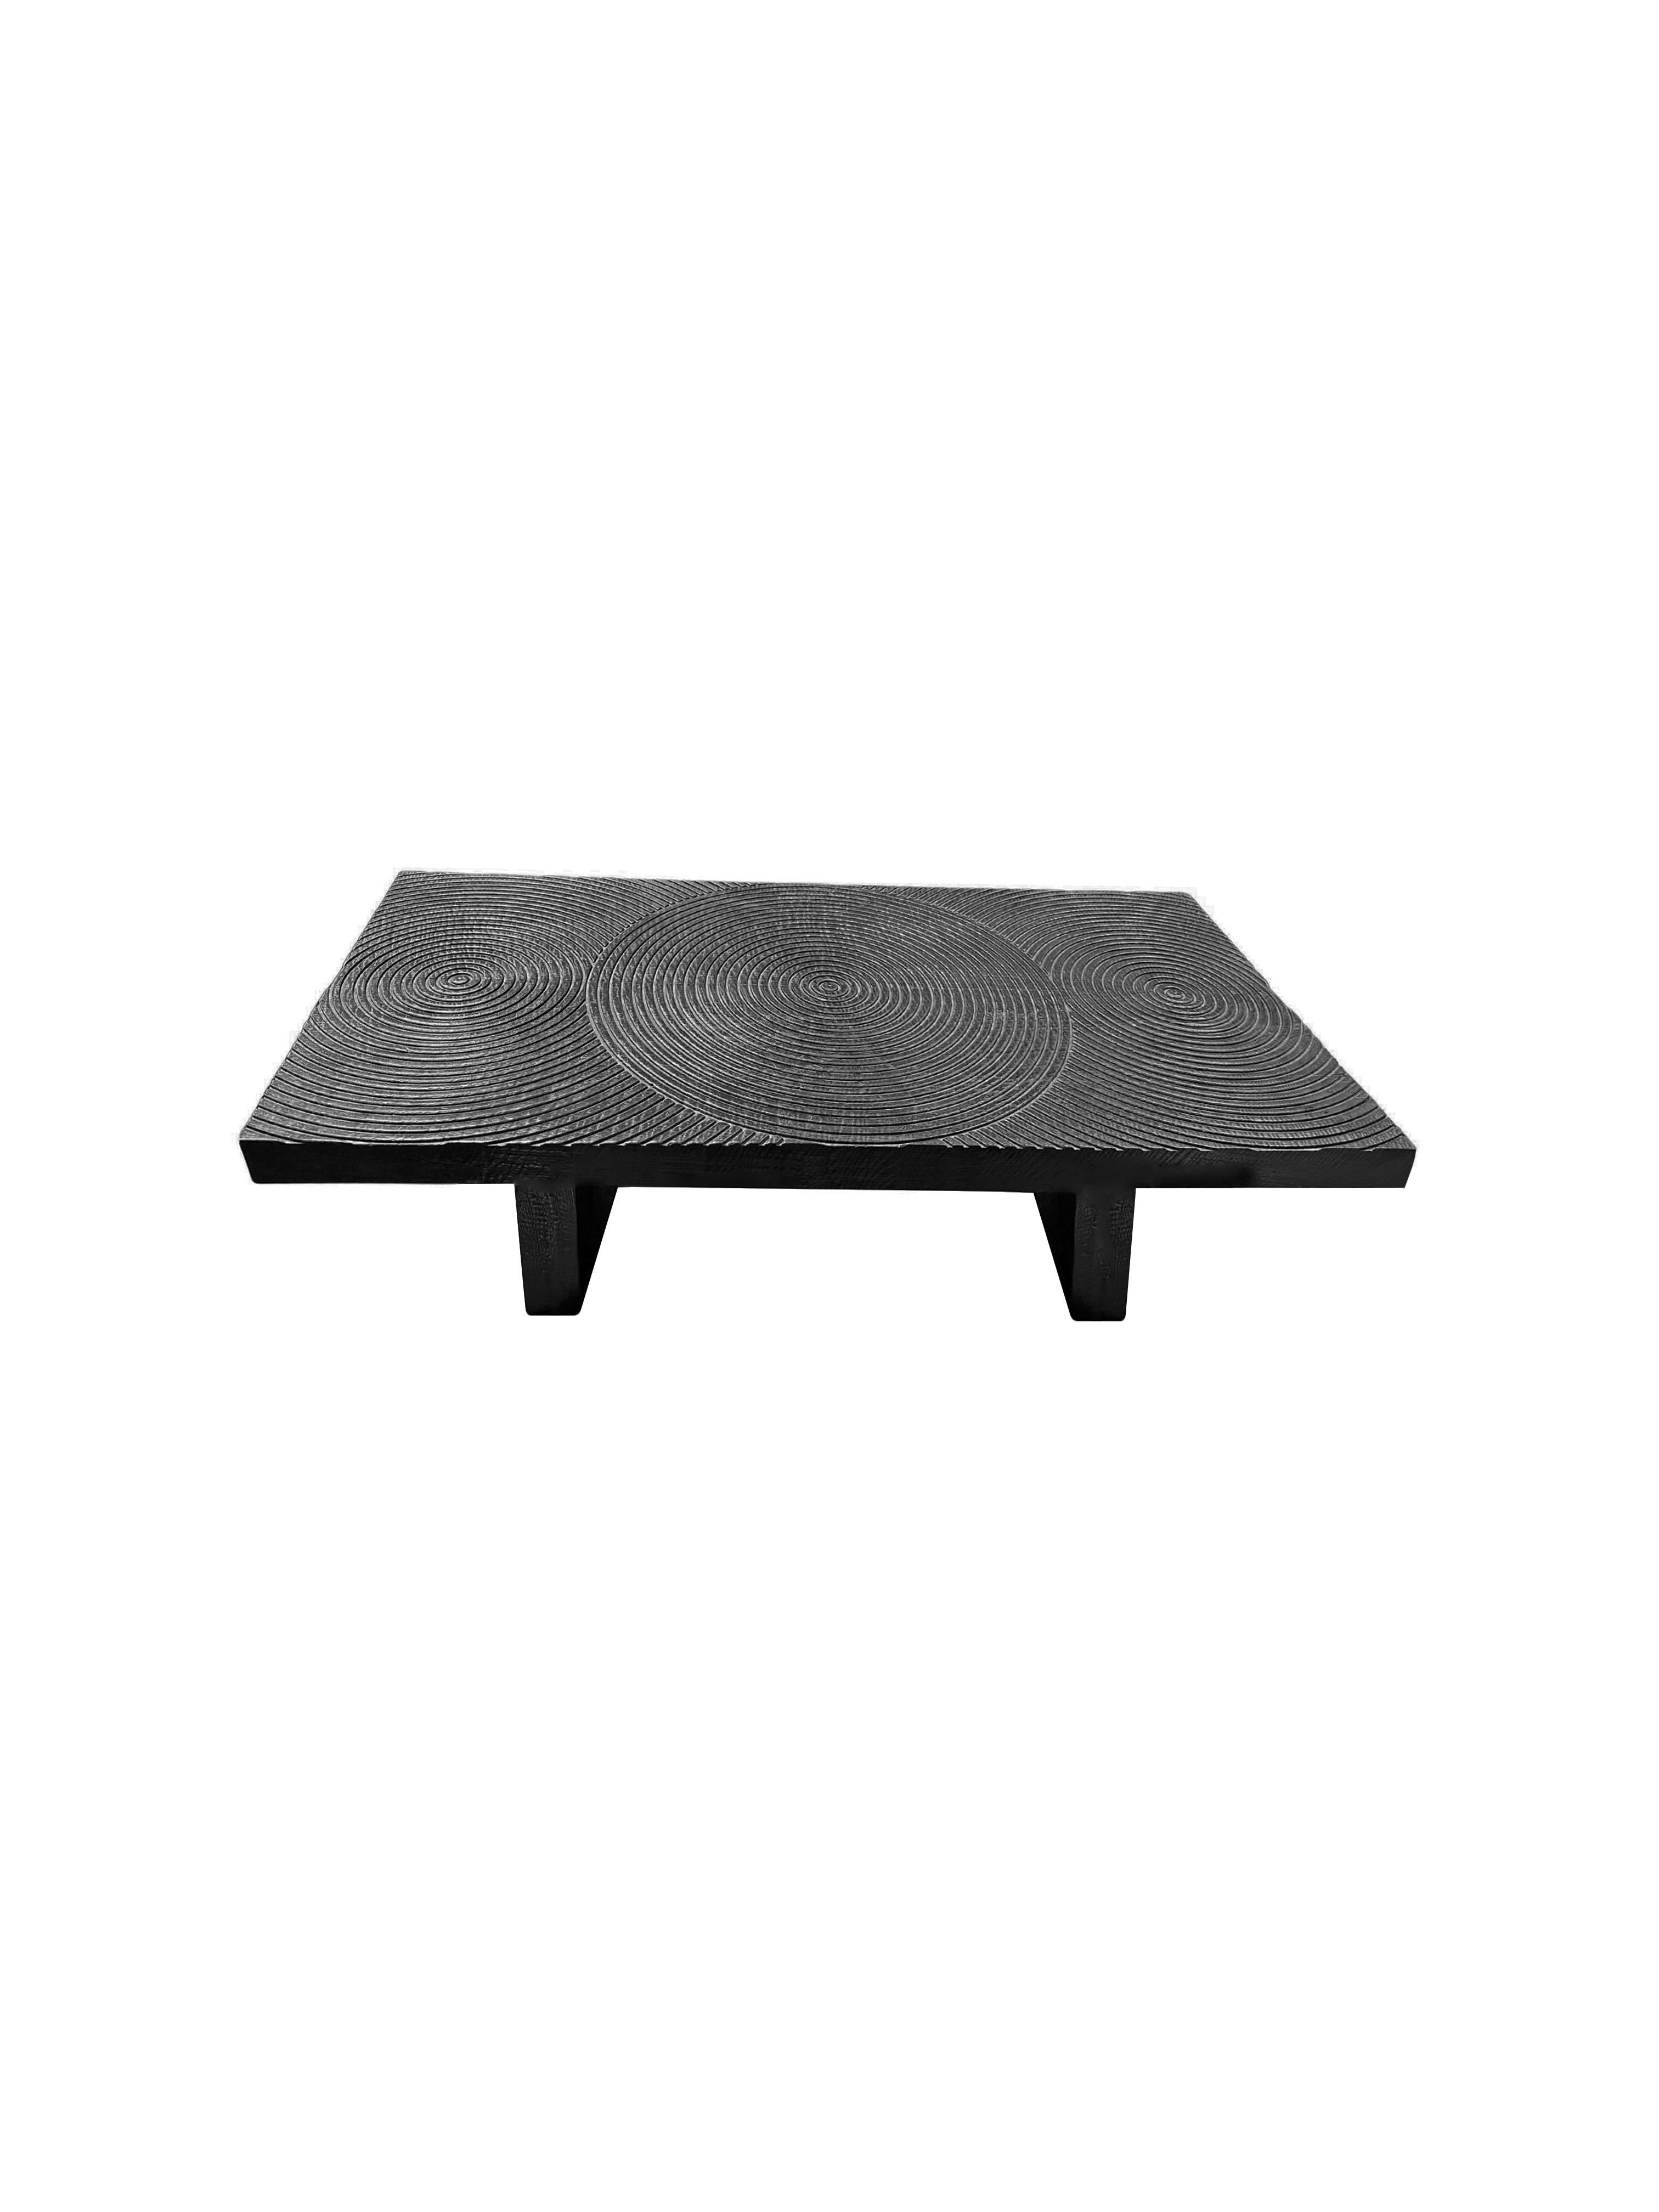 Hand-Crafted Solid Sculptural Mango Wood Table, Burnt Finish, Modern Organic For Sale